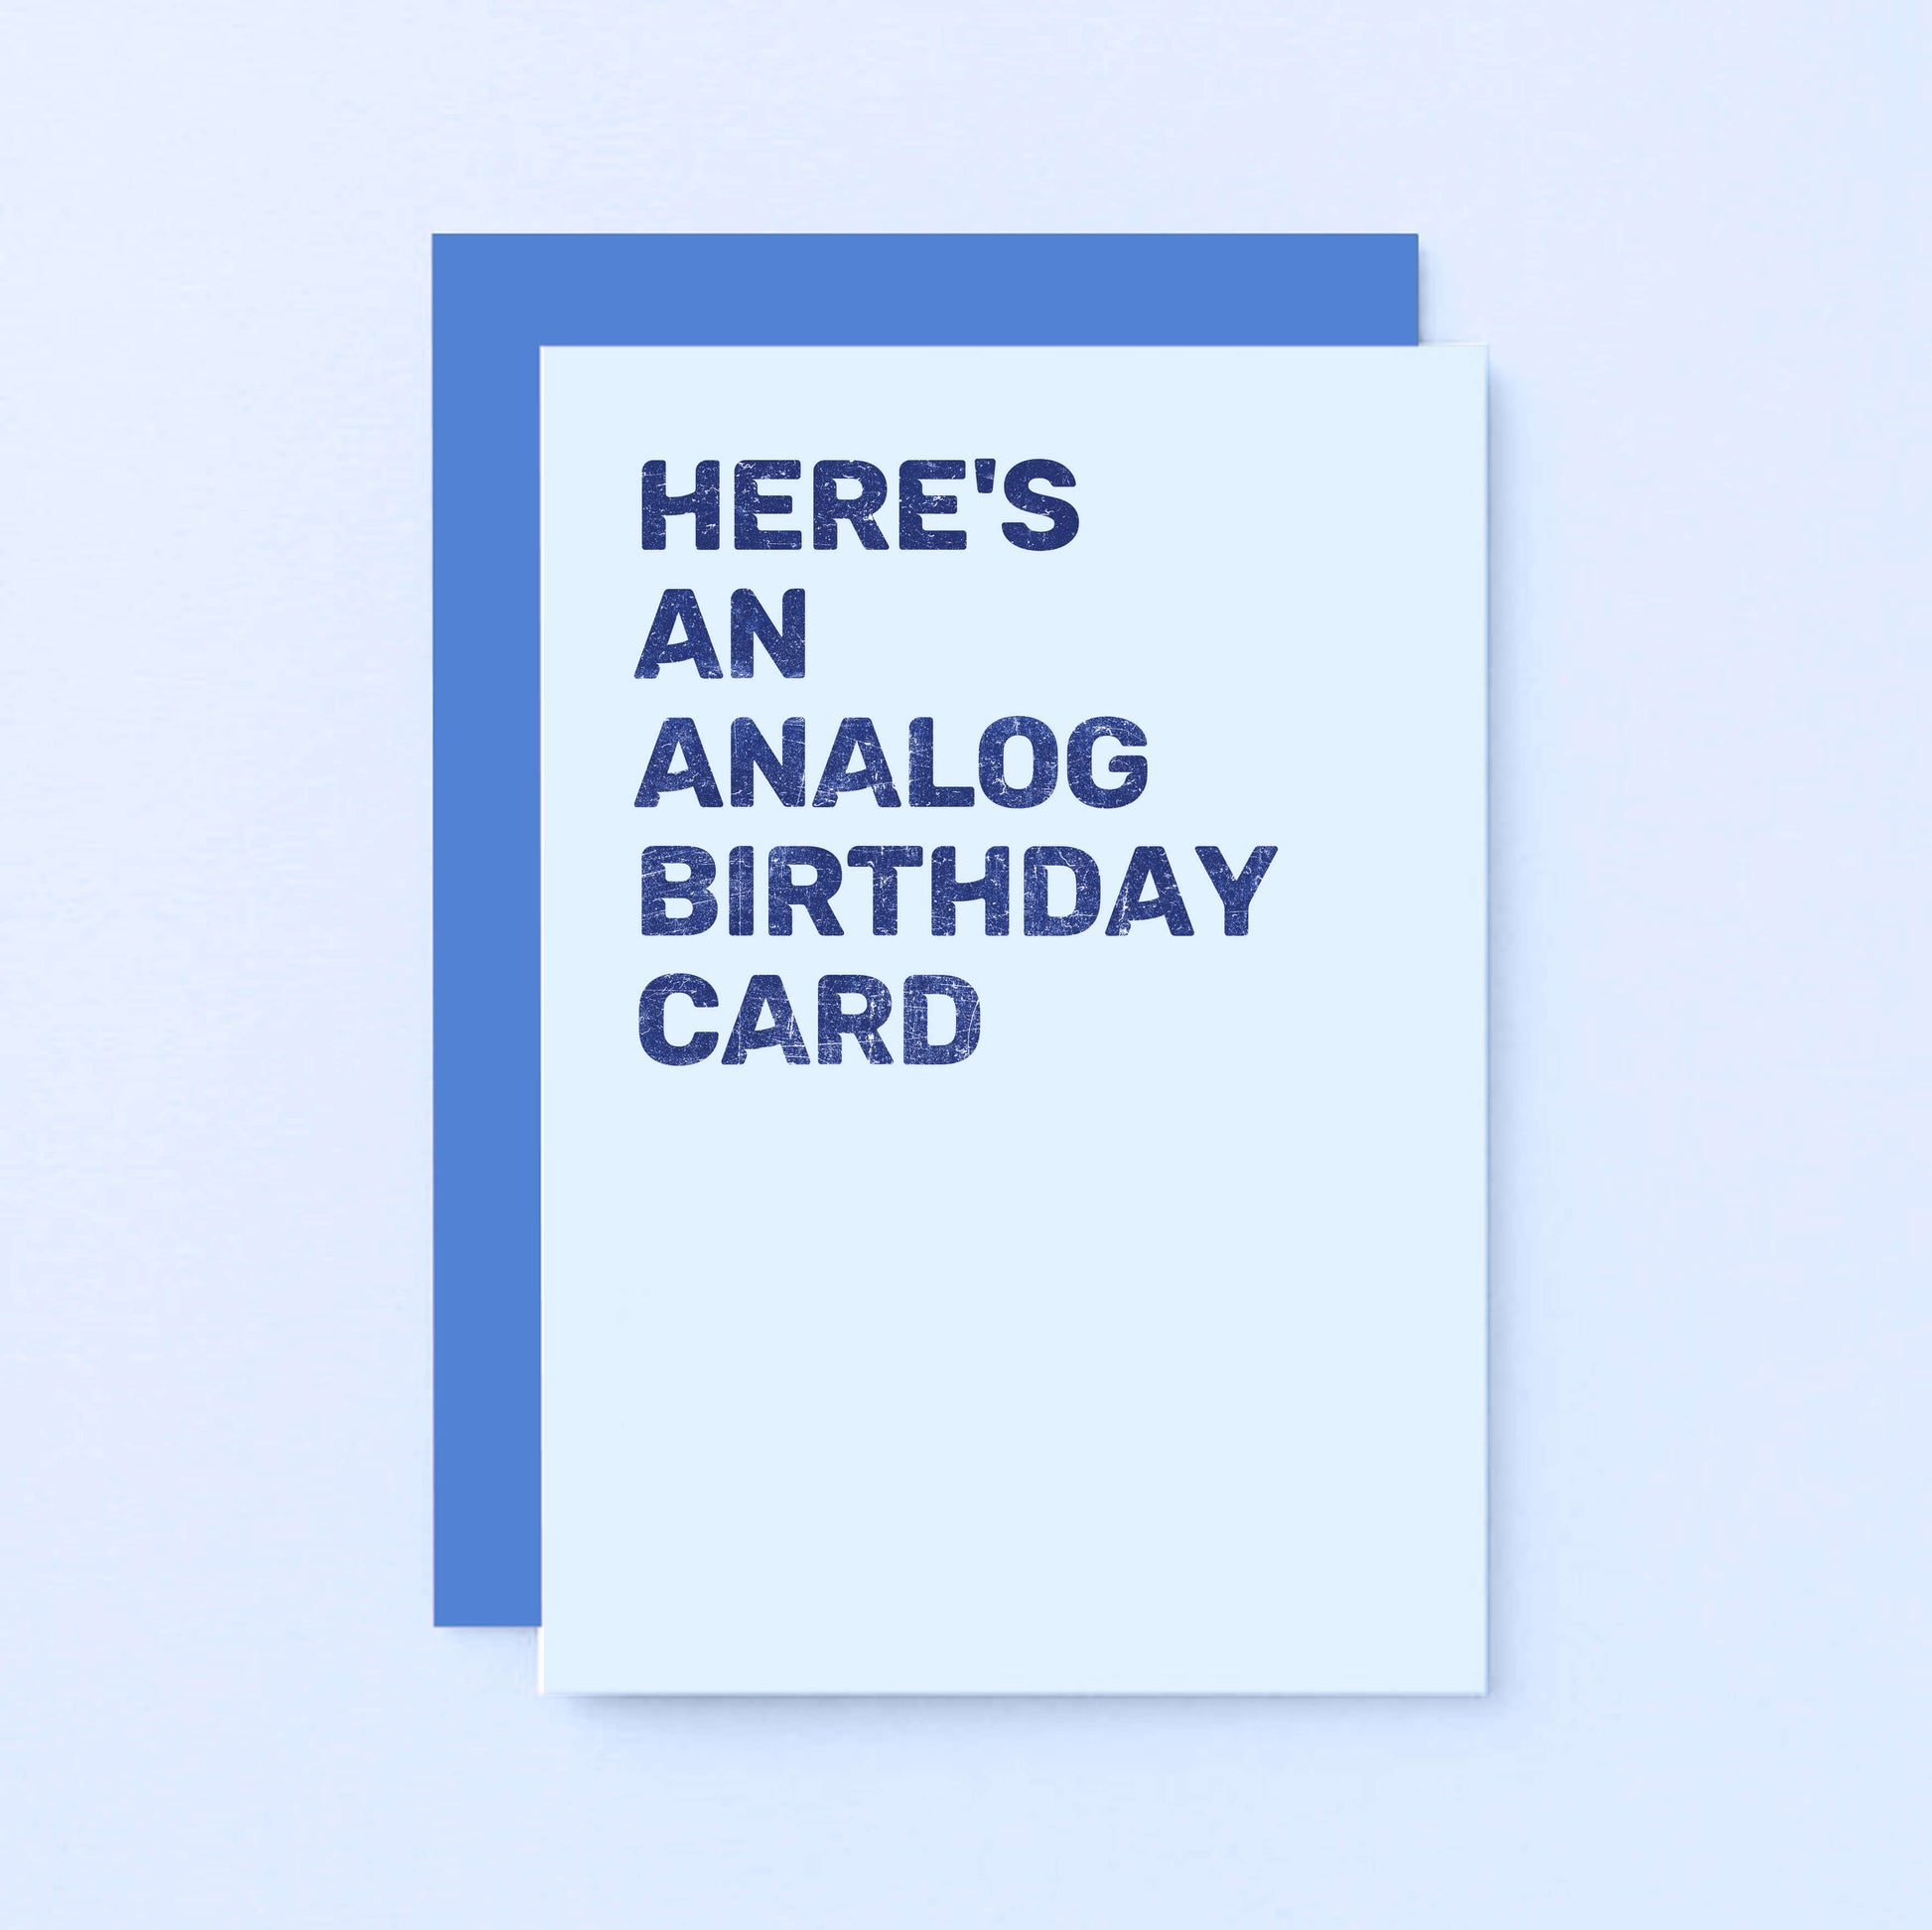 Birthday Card by SixElevenCreations. Reads Here's an analog birthday card. Product Code SE0801A6